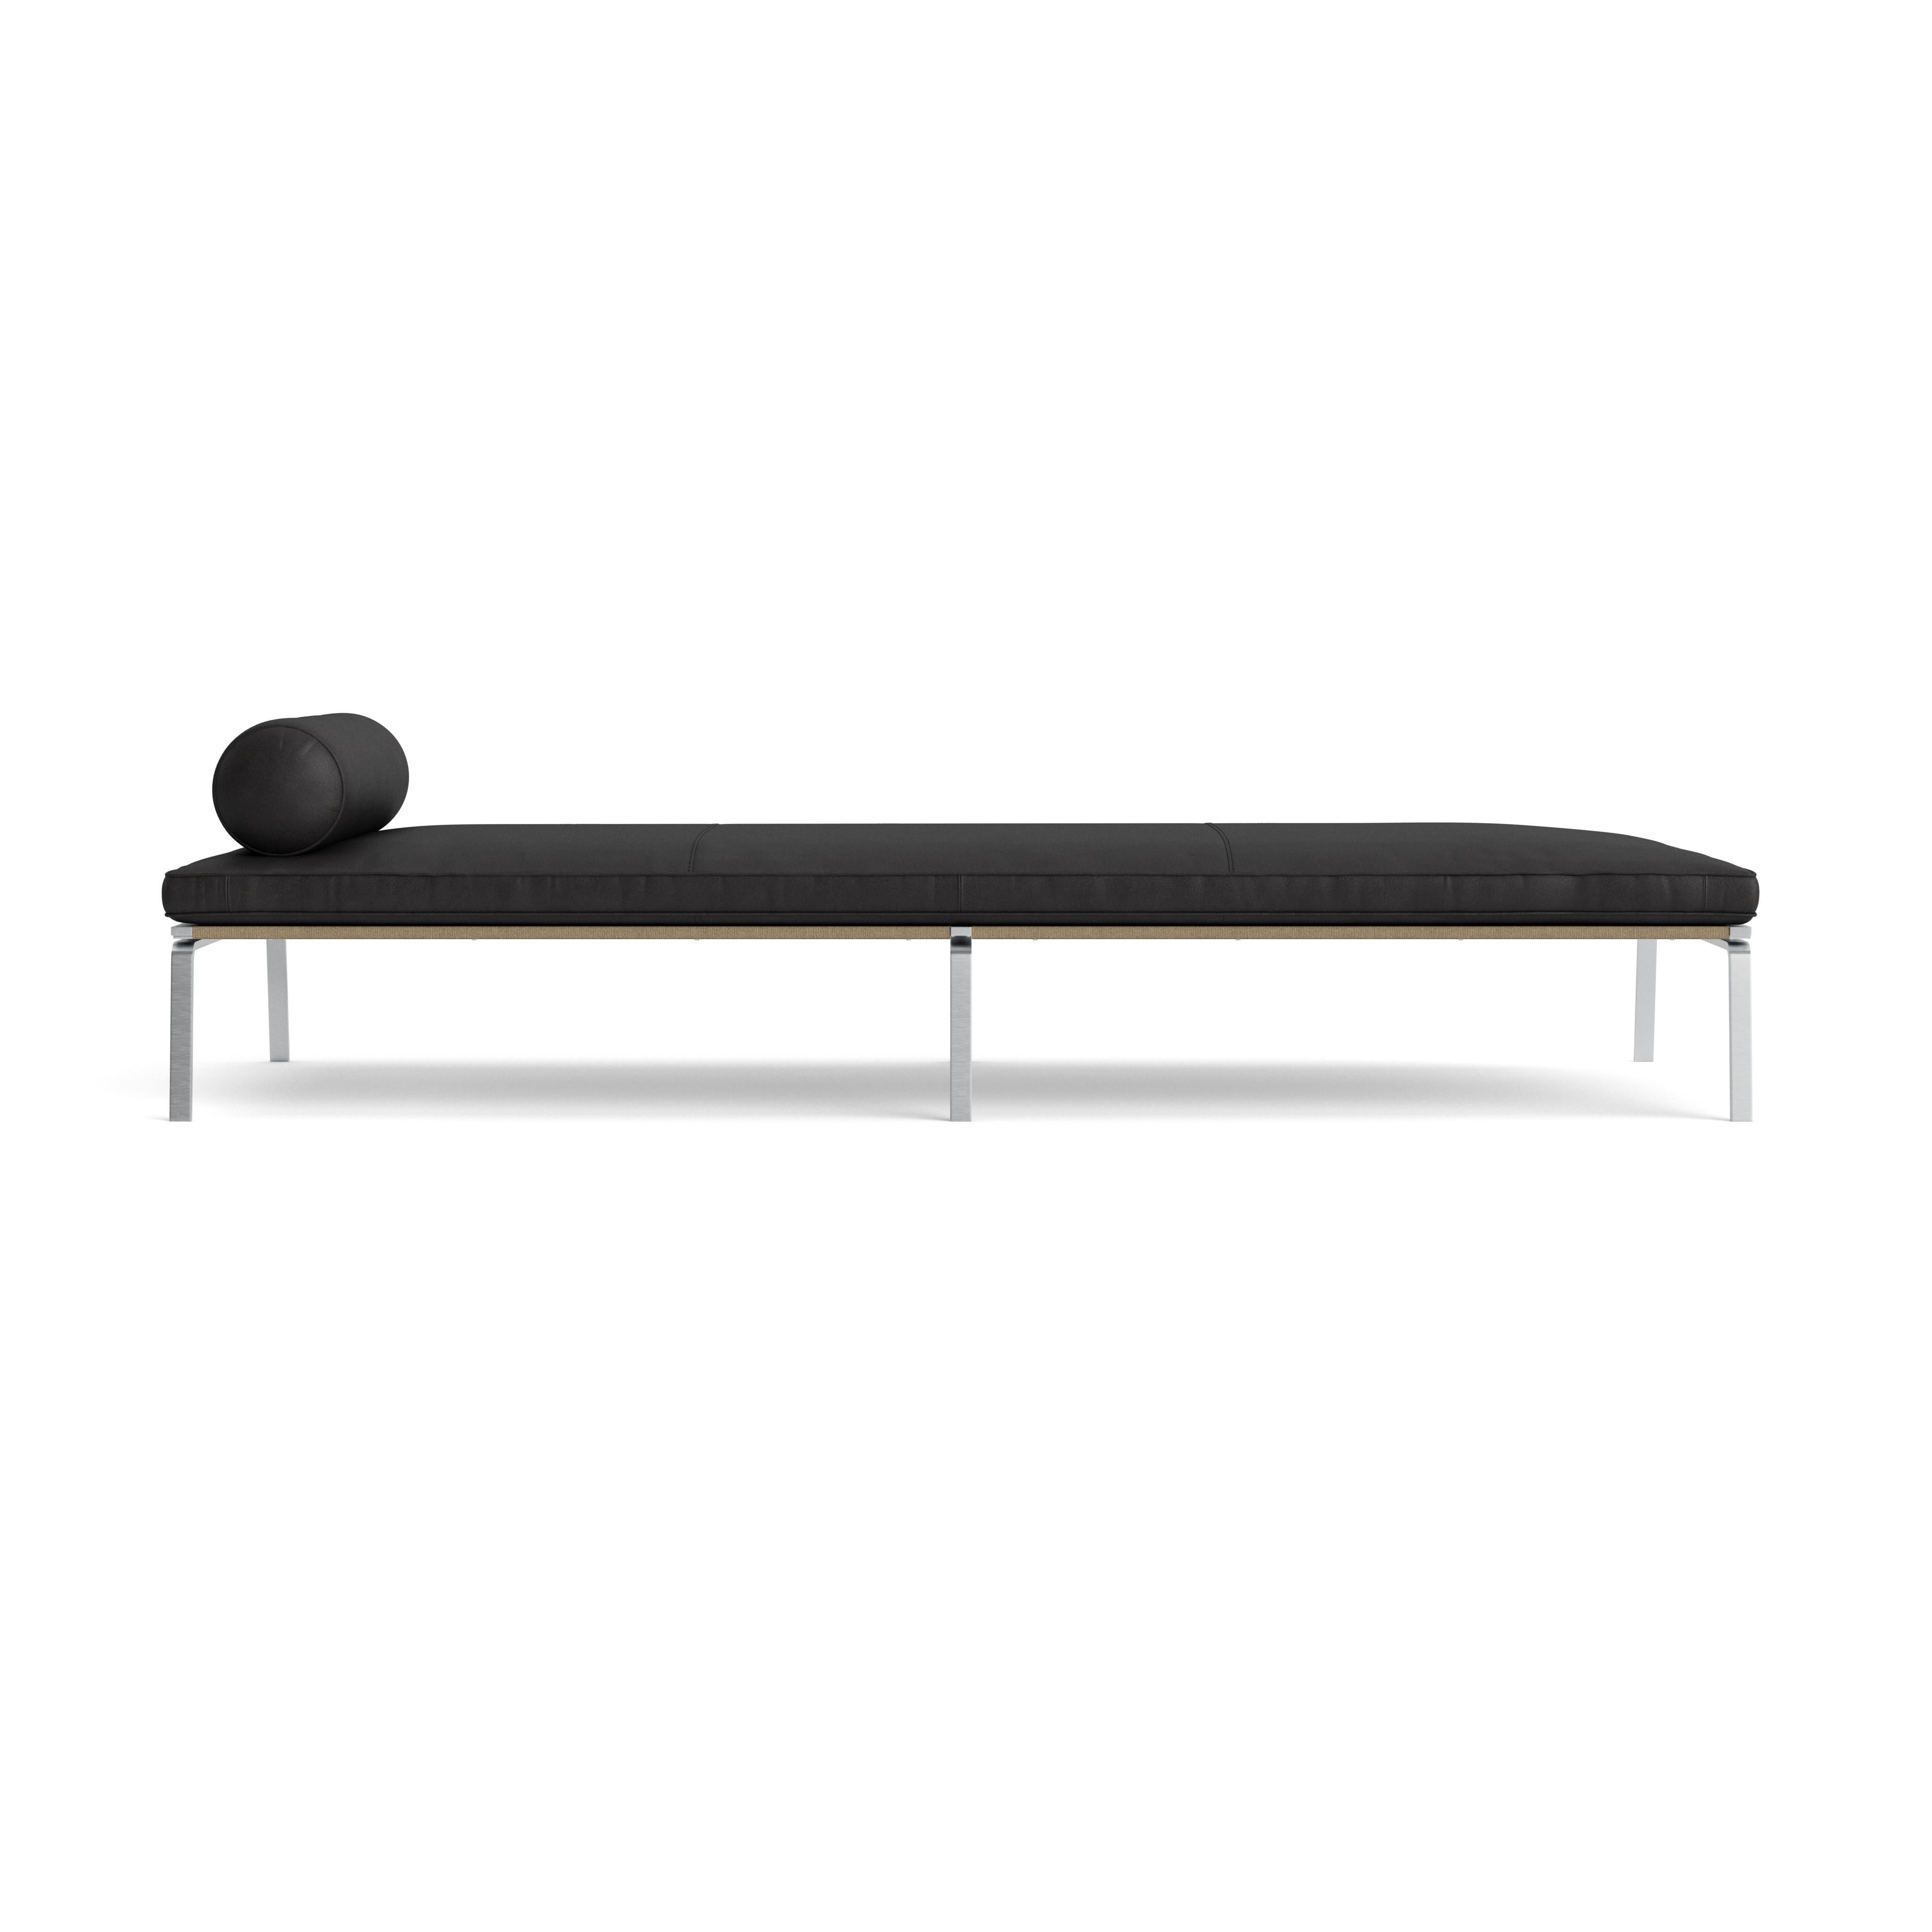 Man Daybed by NORR11
Dimensions: D 85 x W 202 x H 30 cm. 
Materials: Stainless steel, canvas and leather. 
Upholstery: Dunes Anthrazite.
Weight: 42 kg.

Available in different upholstery options. Please contact us. 

The collection references the